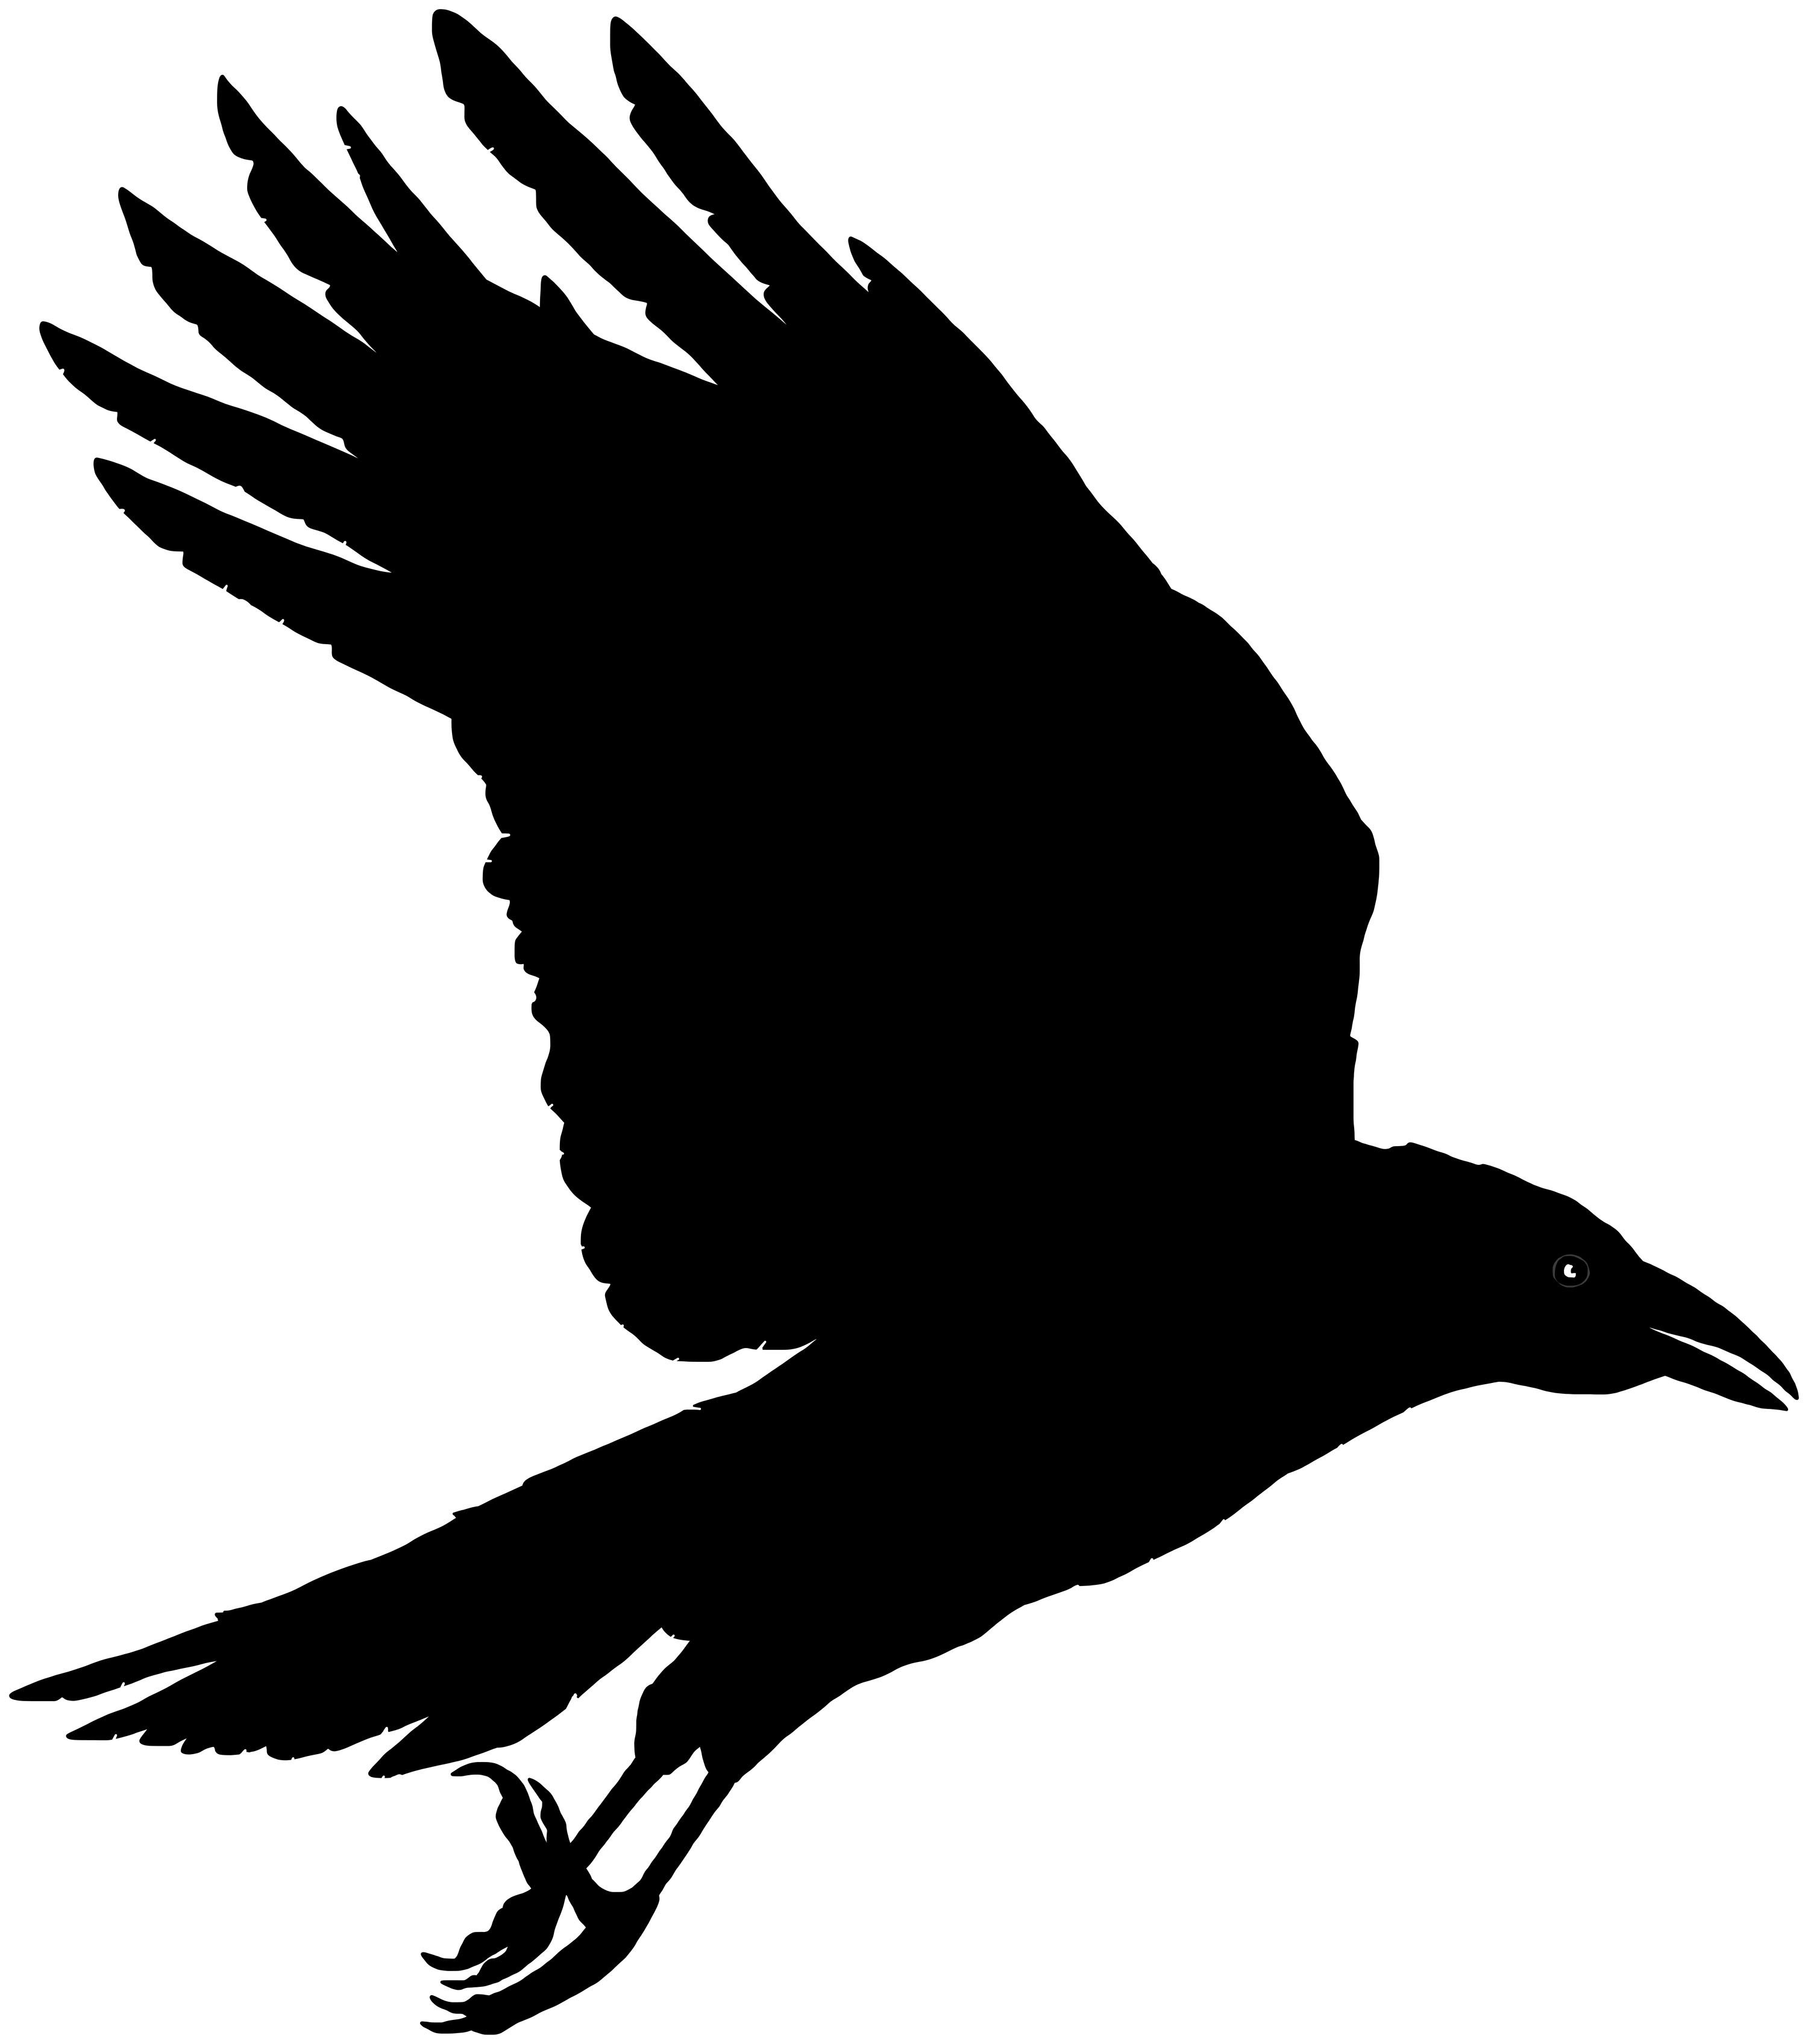 Crows flying clipart.